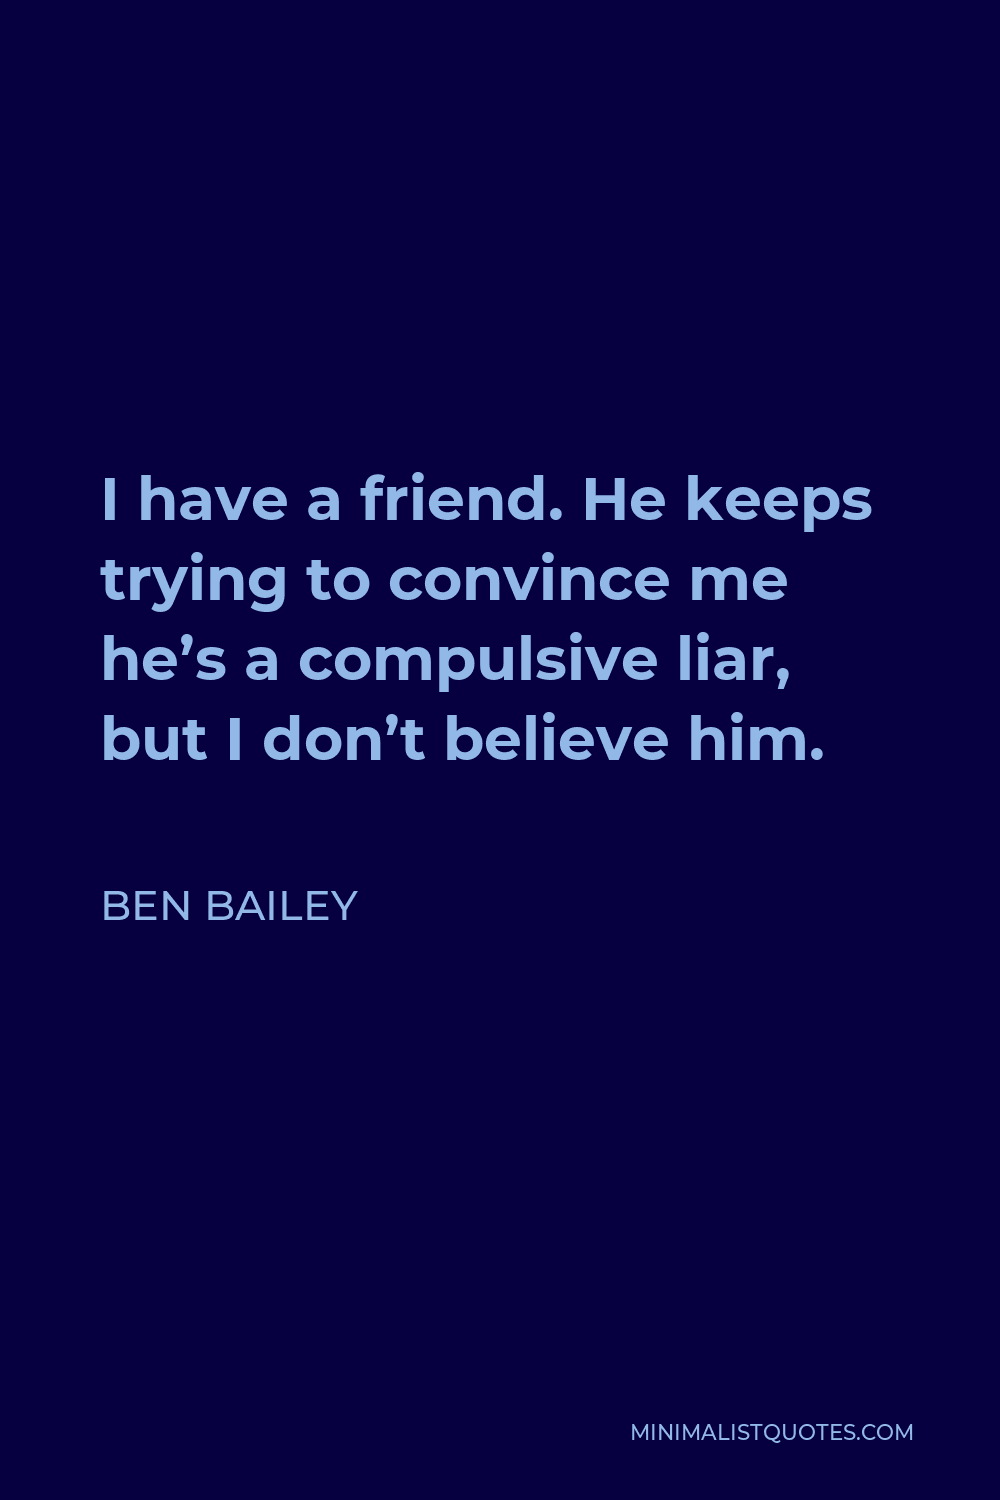 Ben Bailey Quote - I have a friend. He keeps trying to convince me he’s a compulsive liar, but I don’t believe him.